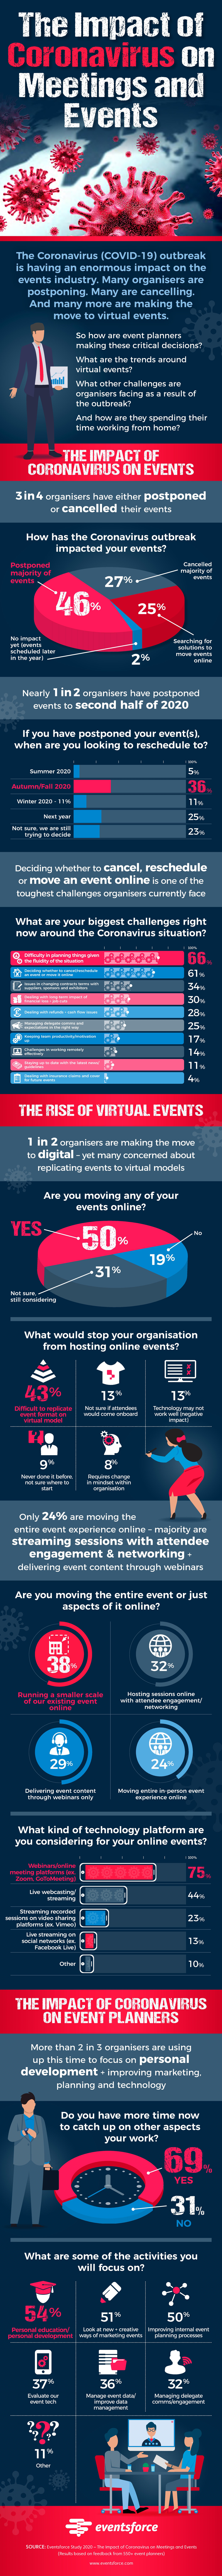 New Eventsforce Research Finds Majority of 2020 Events Have Been Cancelled or Postponed